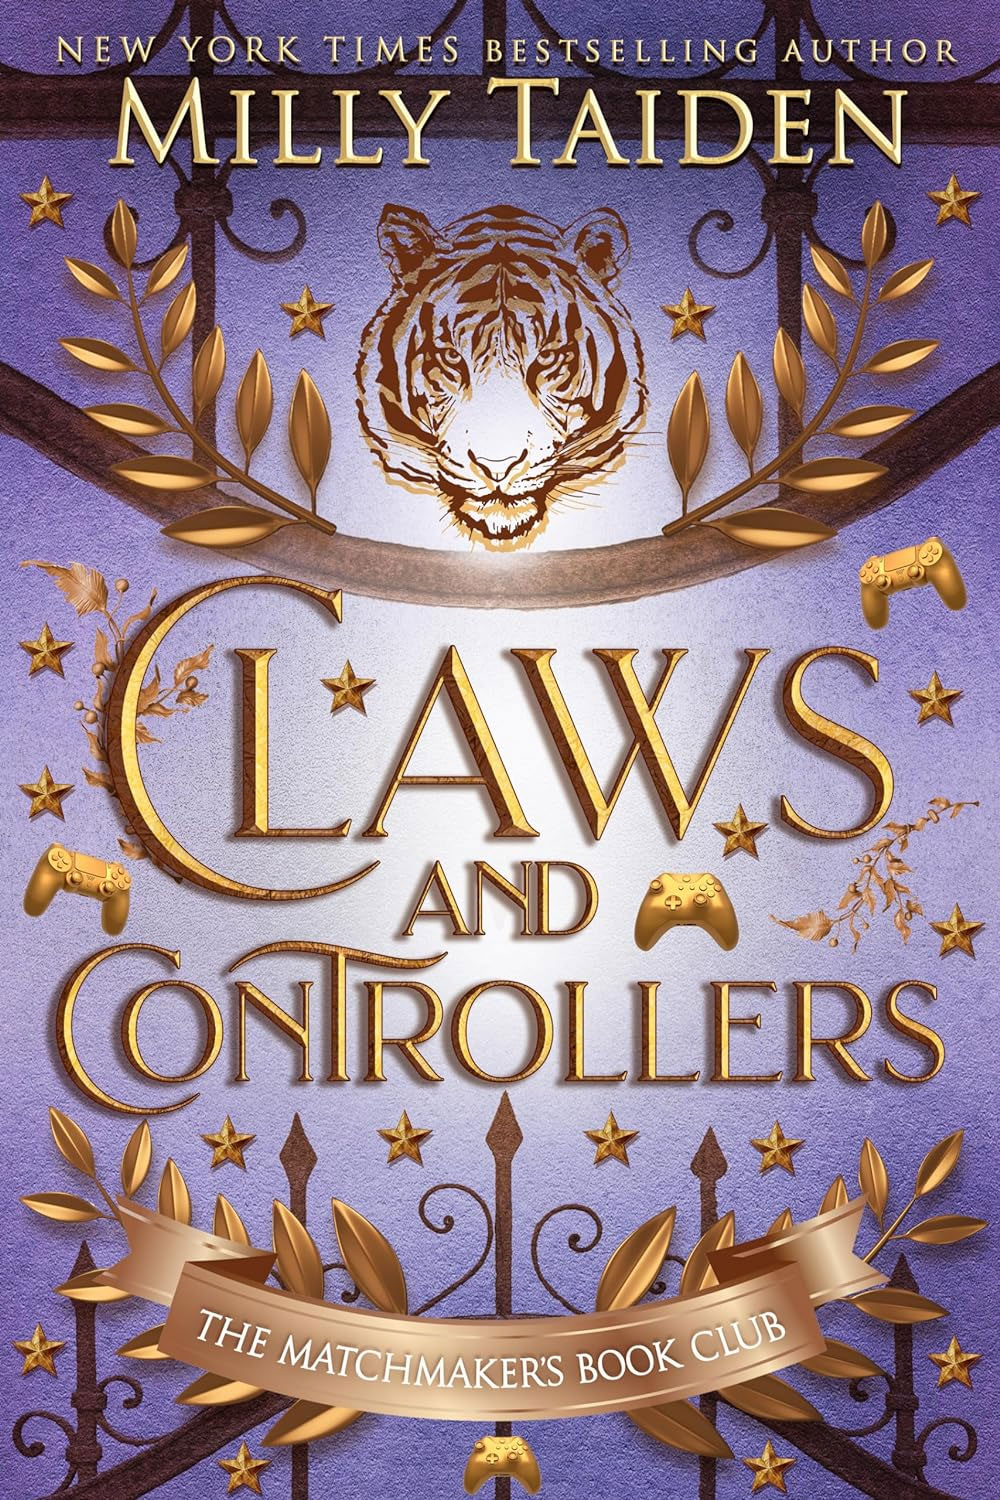 Claws and Controllers